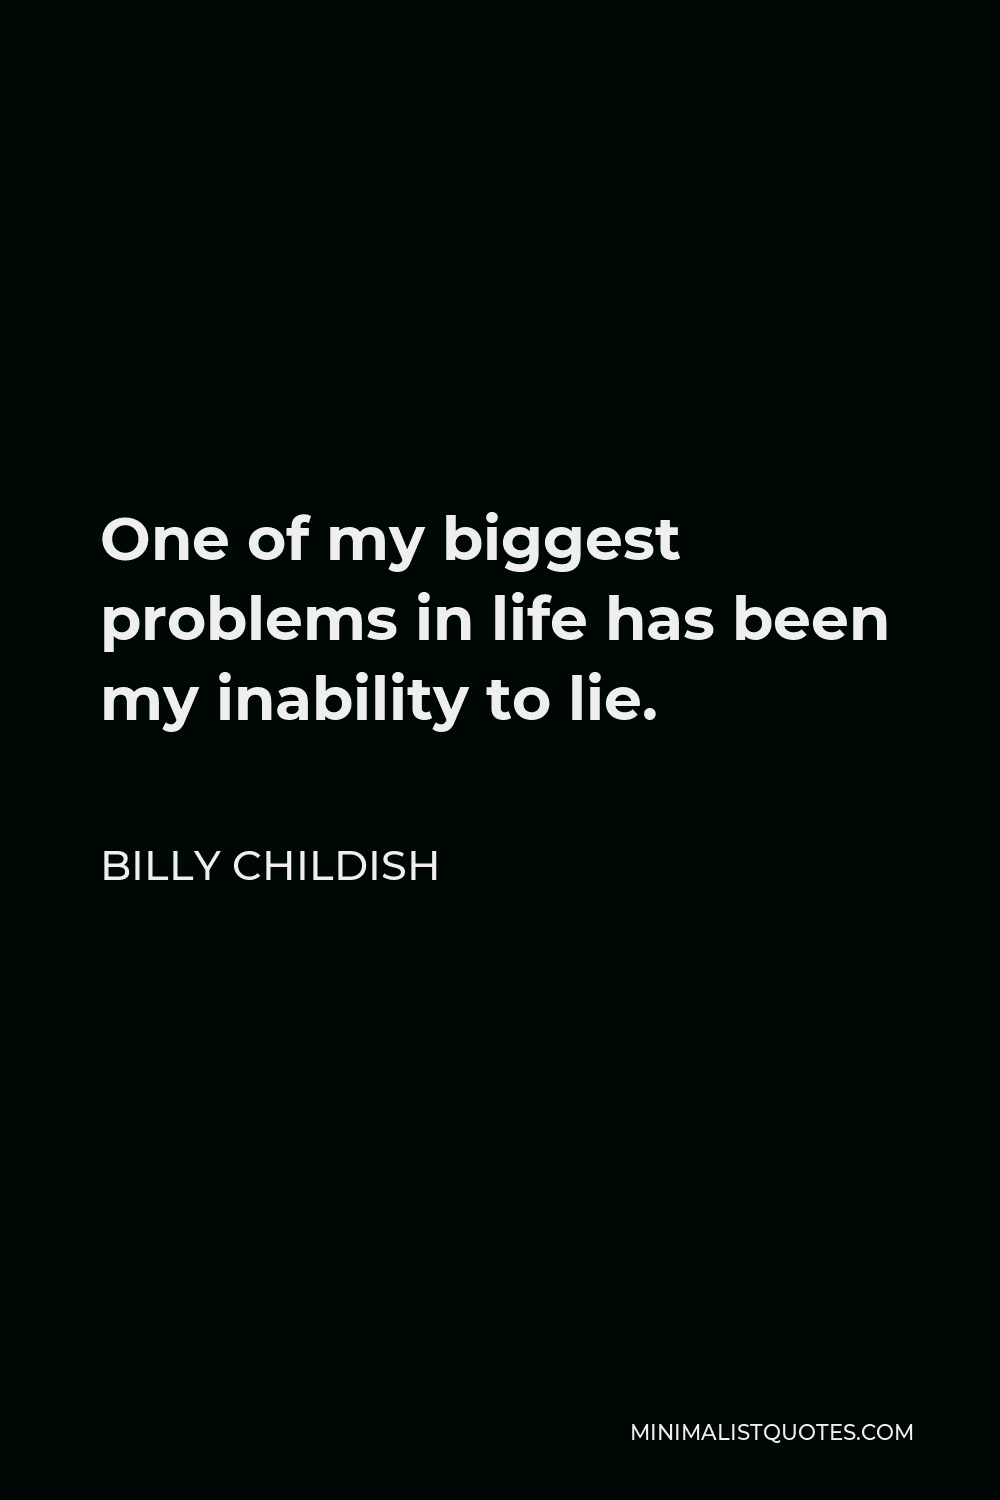 Billy Childish Quote - One of my biggest problems in life has been my inability to lie.